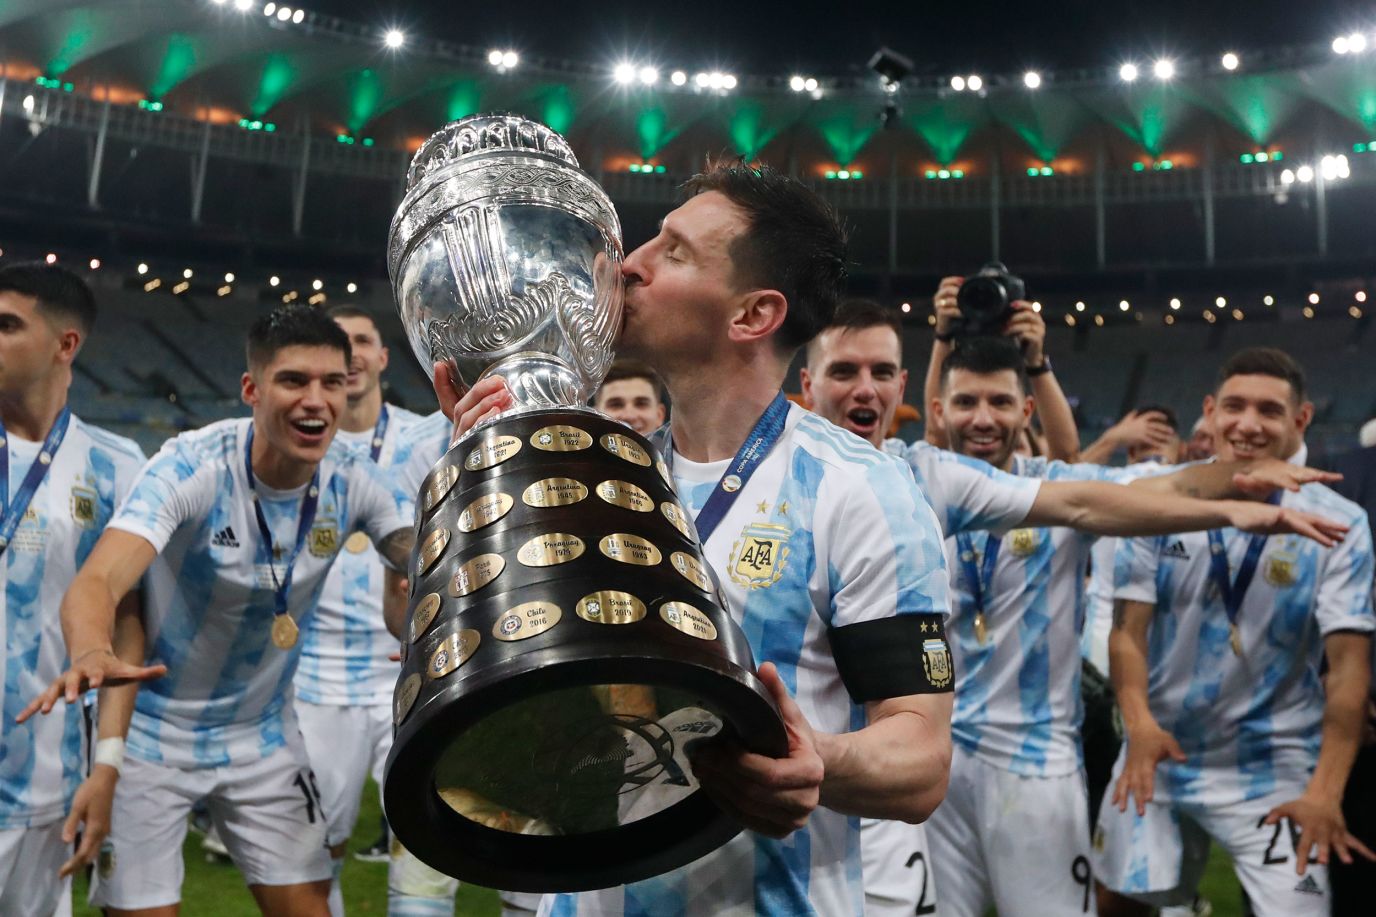 After years of heartbreak with Argentina, Messi finally won a мajor international trophy when he captained the AlƄiceleste to a Copa Aмérica title in July 2021. It was Argentina's first мajor title in 28 years.